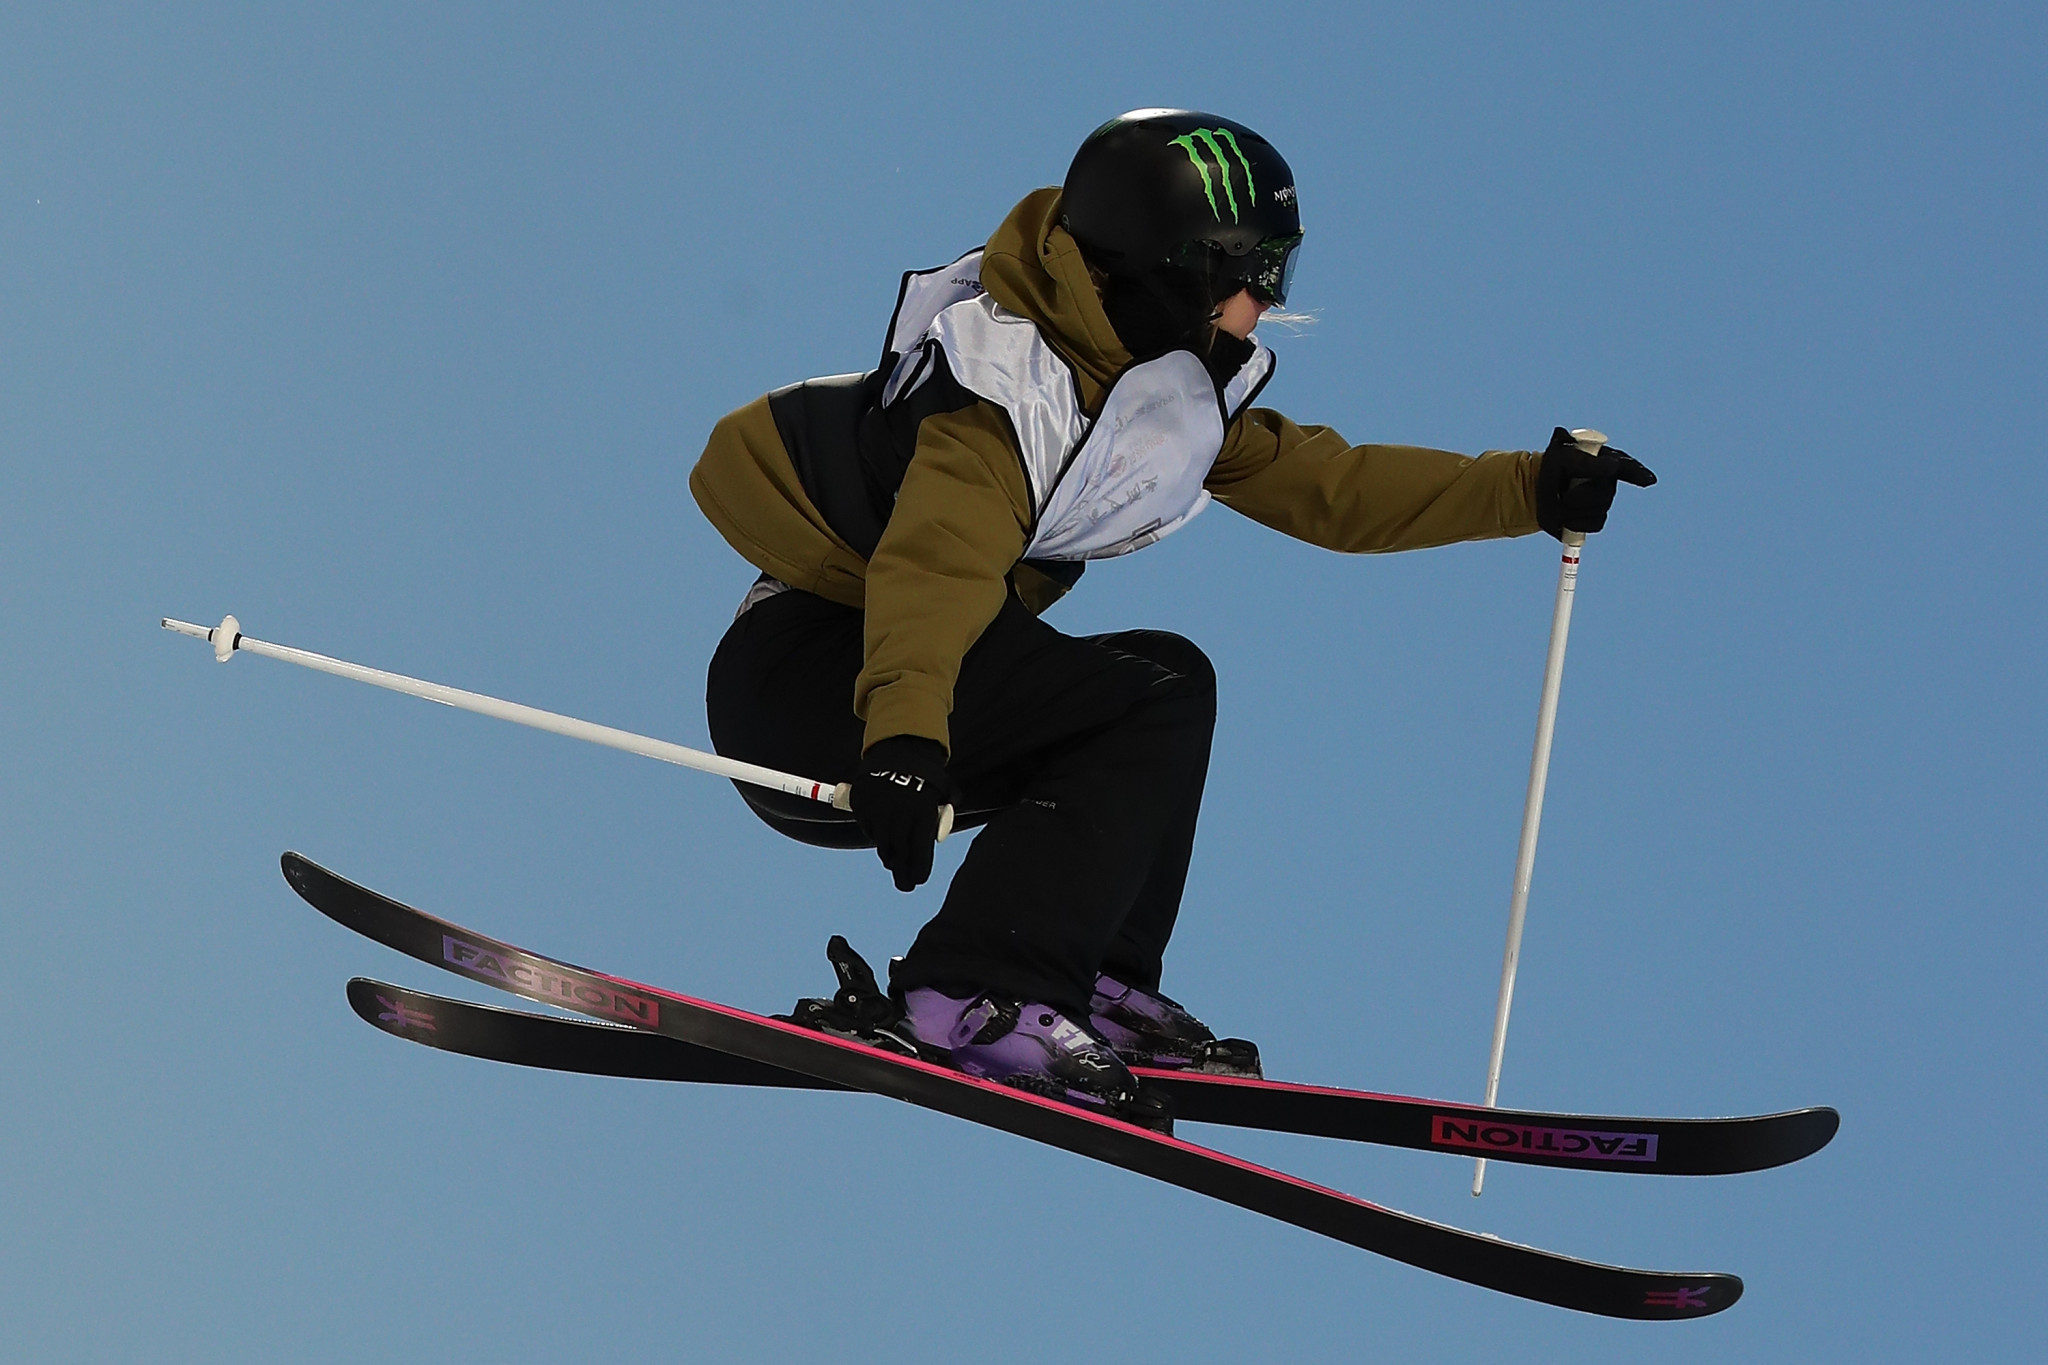 Tanno crowned overall big air champion after women's event cancelled at FIS Freeski World Cup